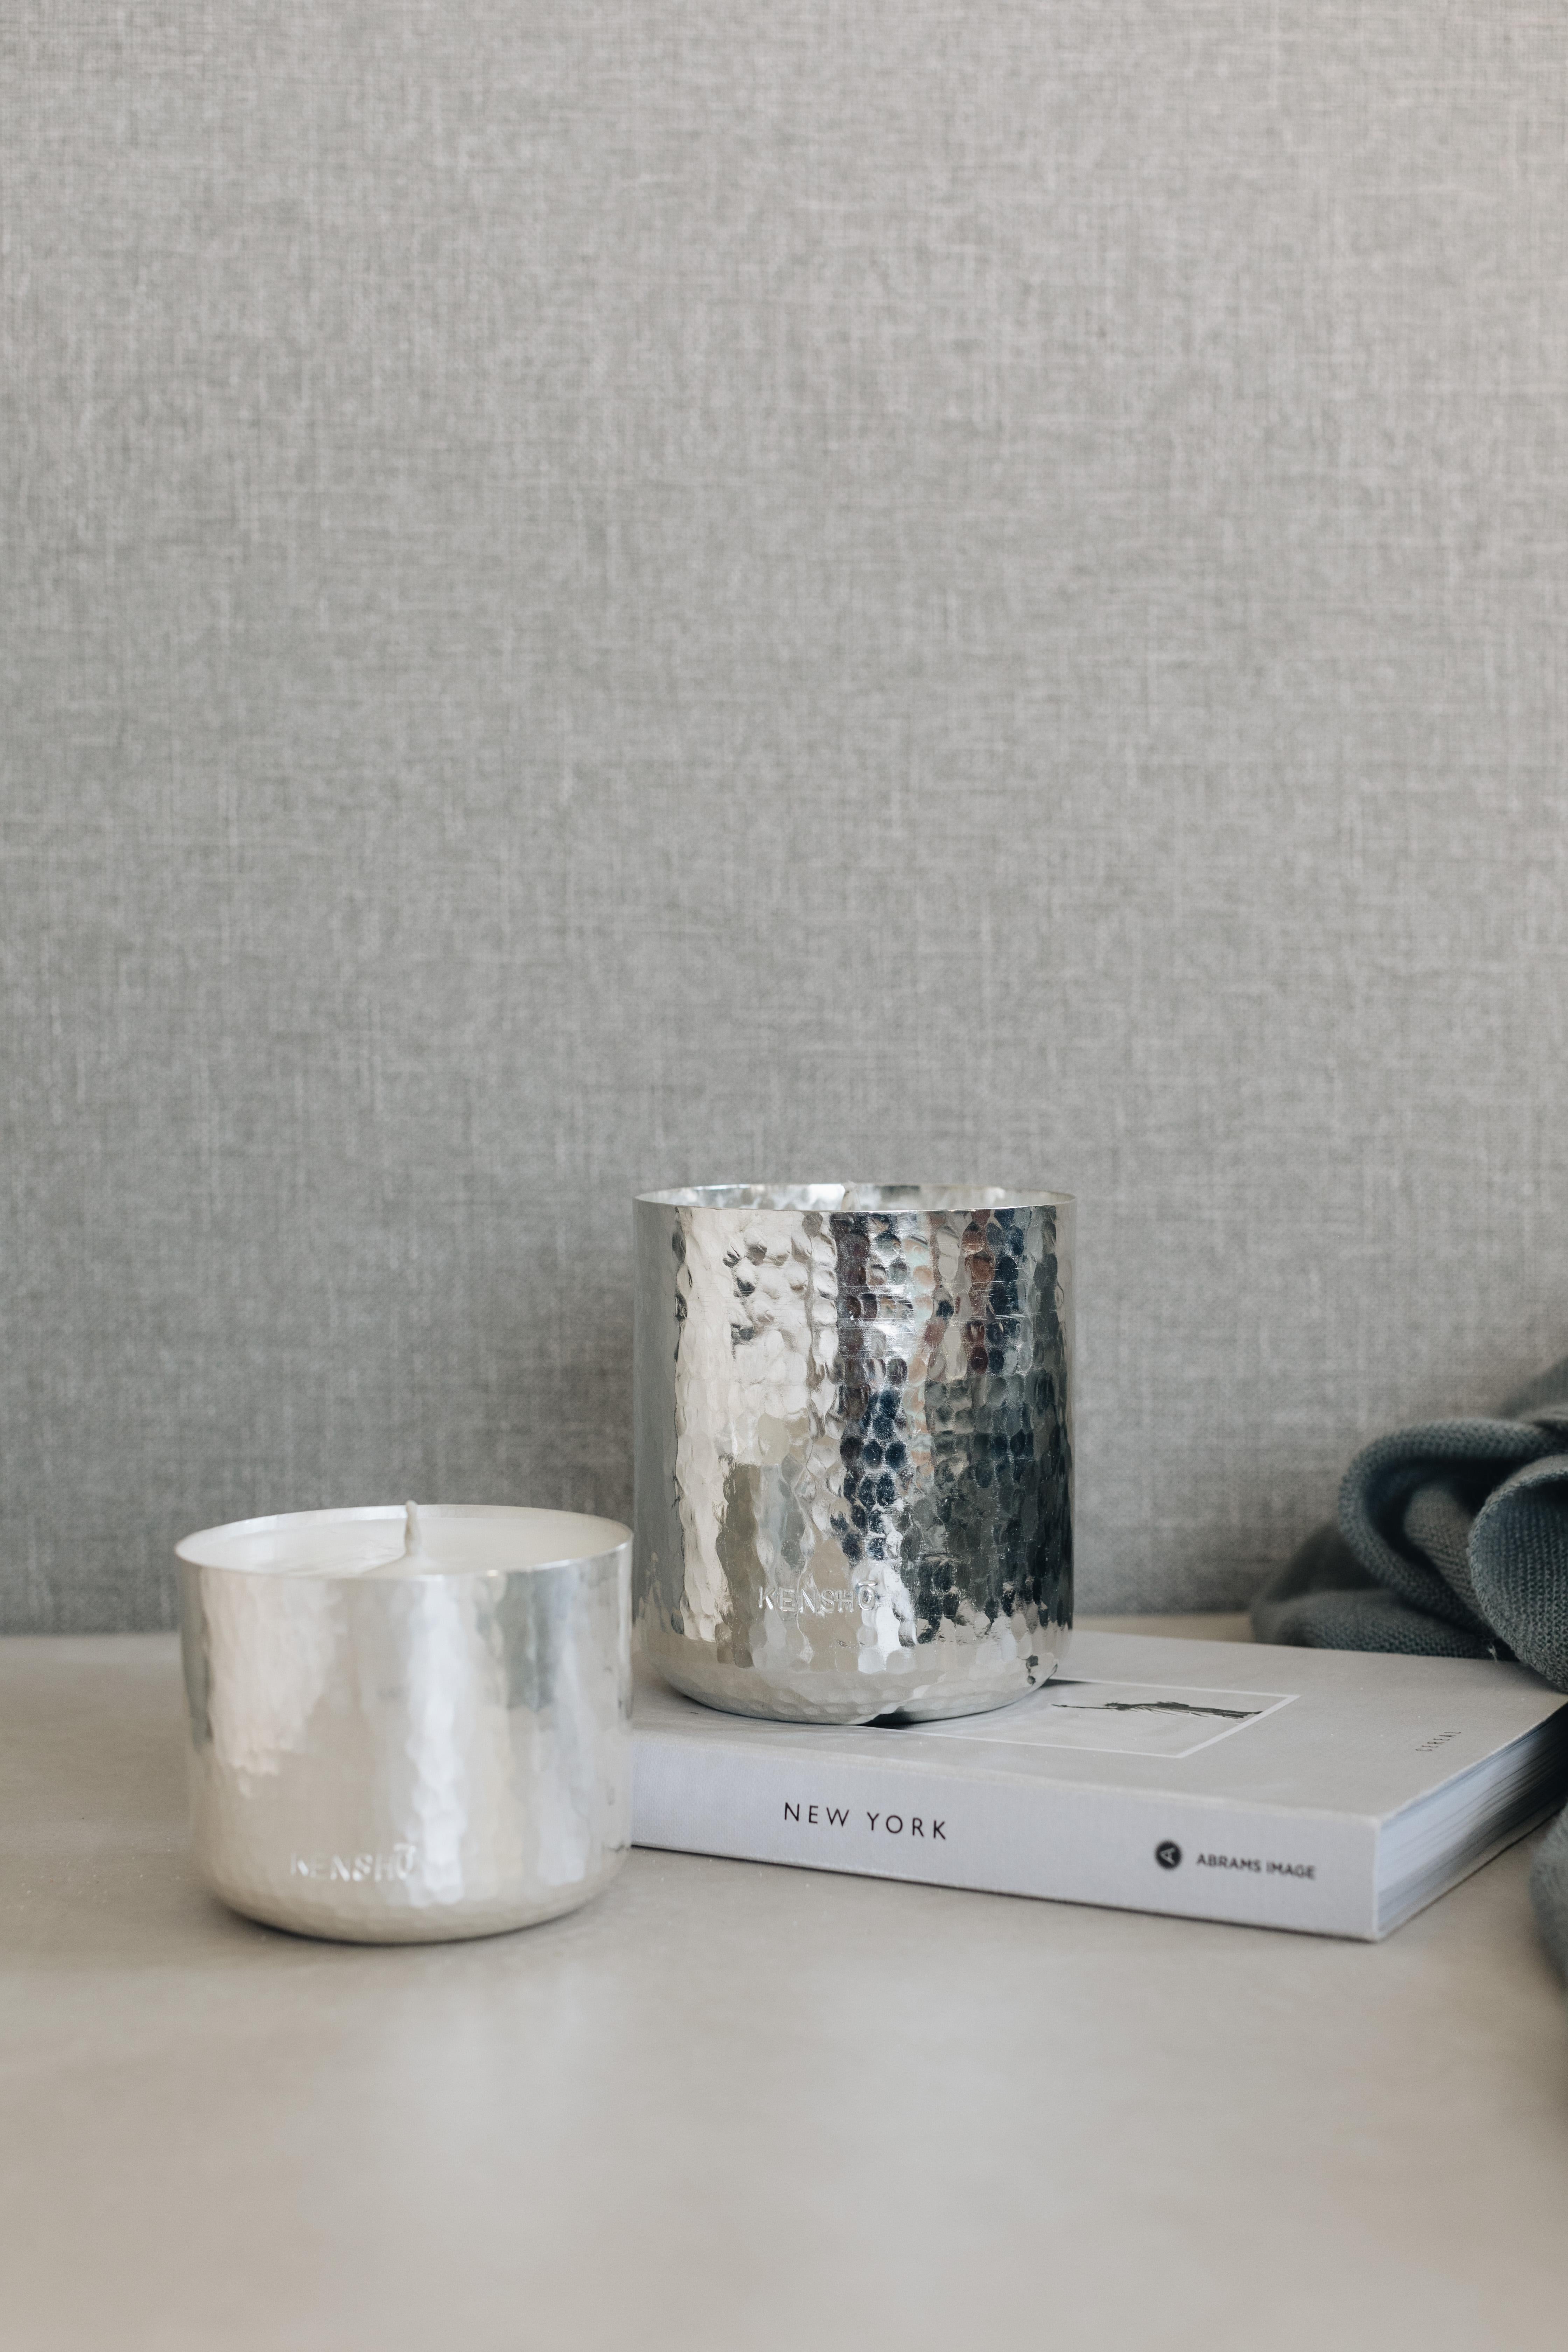 This stunning soy wax candle, crafted by skilled Mexican artisans, is a true work of art. The vase is made of hand-hammered copper with tin which gives it this silver color. It has an earthy, natural feel that fits perfectly with any home decor.